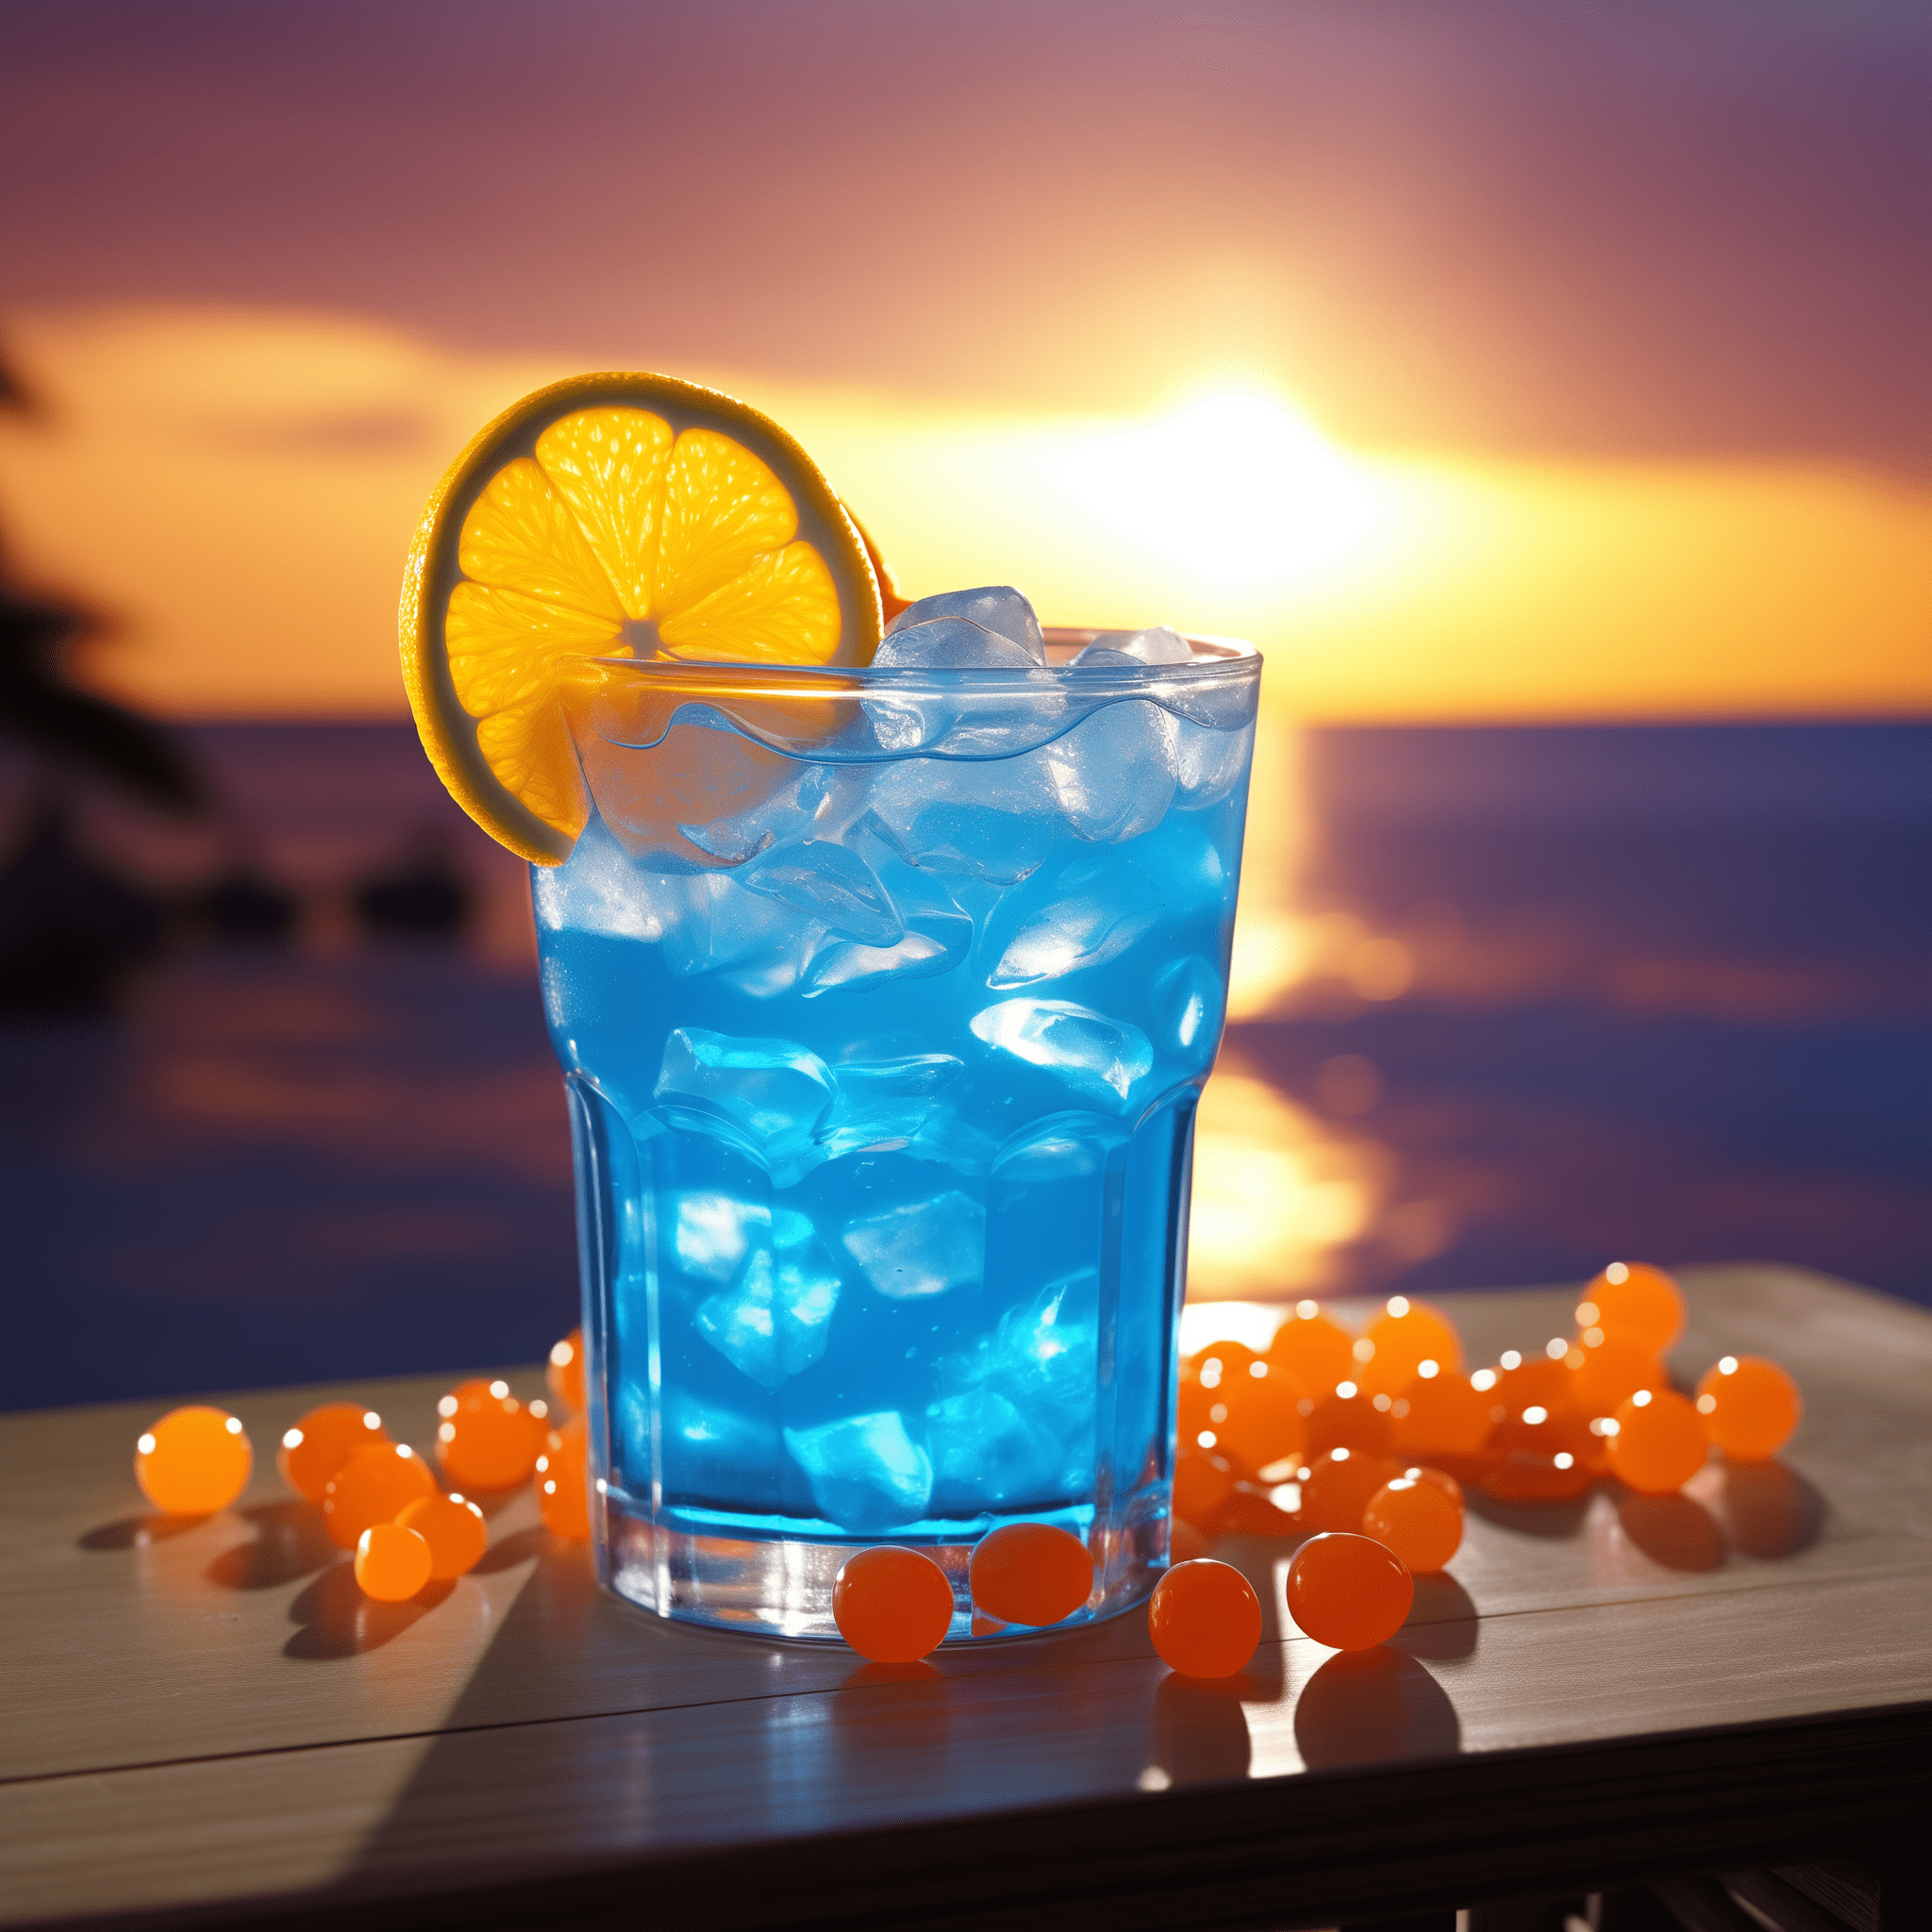 Blue Balls Recipe - The Blue Balls shot is a sweet and fruity delight with a tropical twist. The blue curacao provides a citrusy orange flavor, while the coconut rum adds a creamy, coconut essence. Peach schnapps brings in a juicy peach note, and the dash of Sprite offers a fizzy lift. The sweet and sour mix balances the sweetness with a tangy edge, making it a well-rounded, refreshing shot.